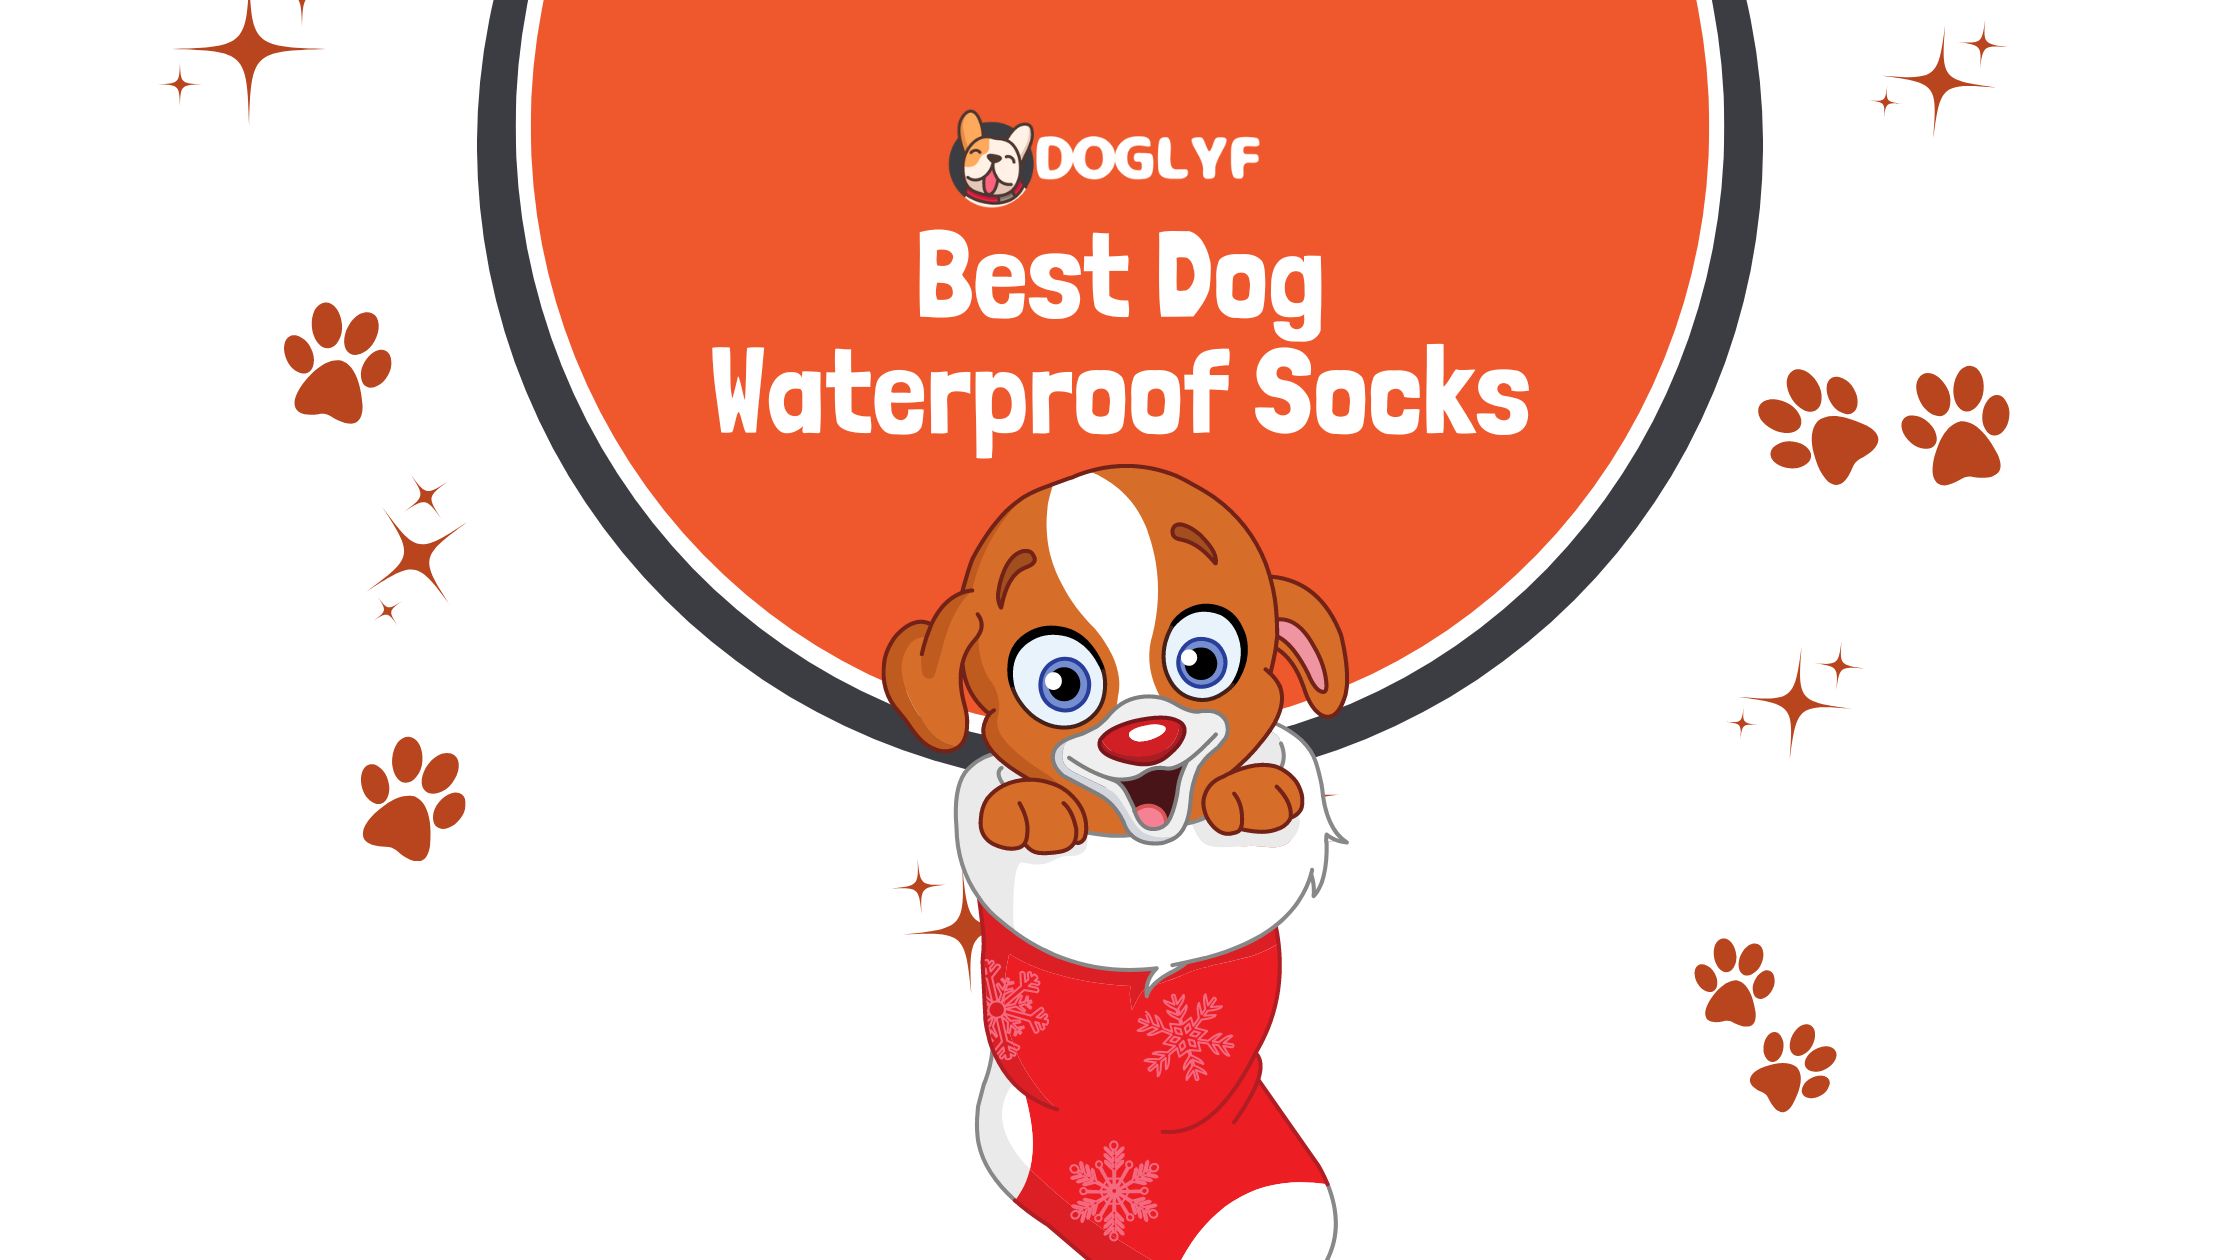 Best Dog Waterproof Socks: 11 Must-Have Options & 1 Essential Tip for Keeping Your Furry Friend Cozy & Dry!